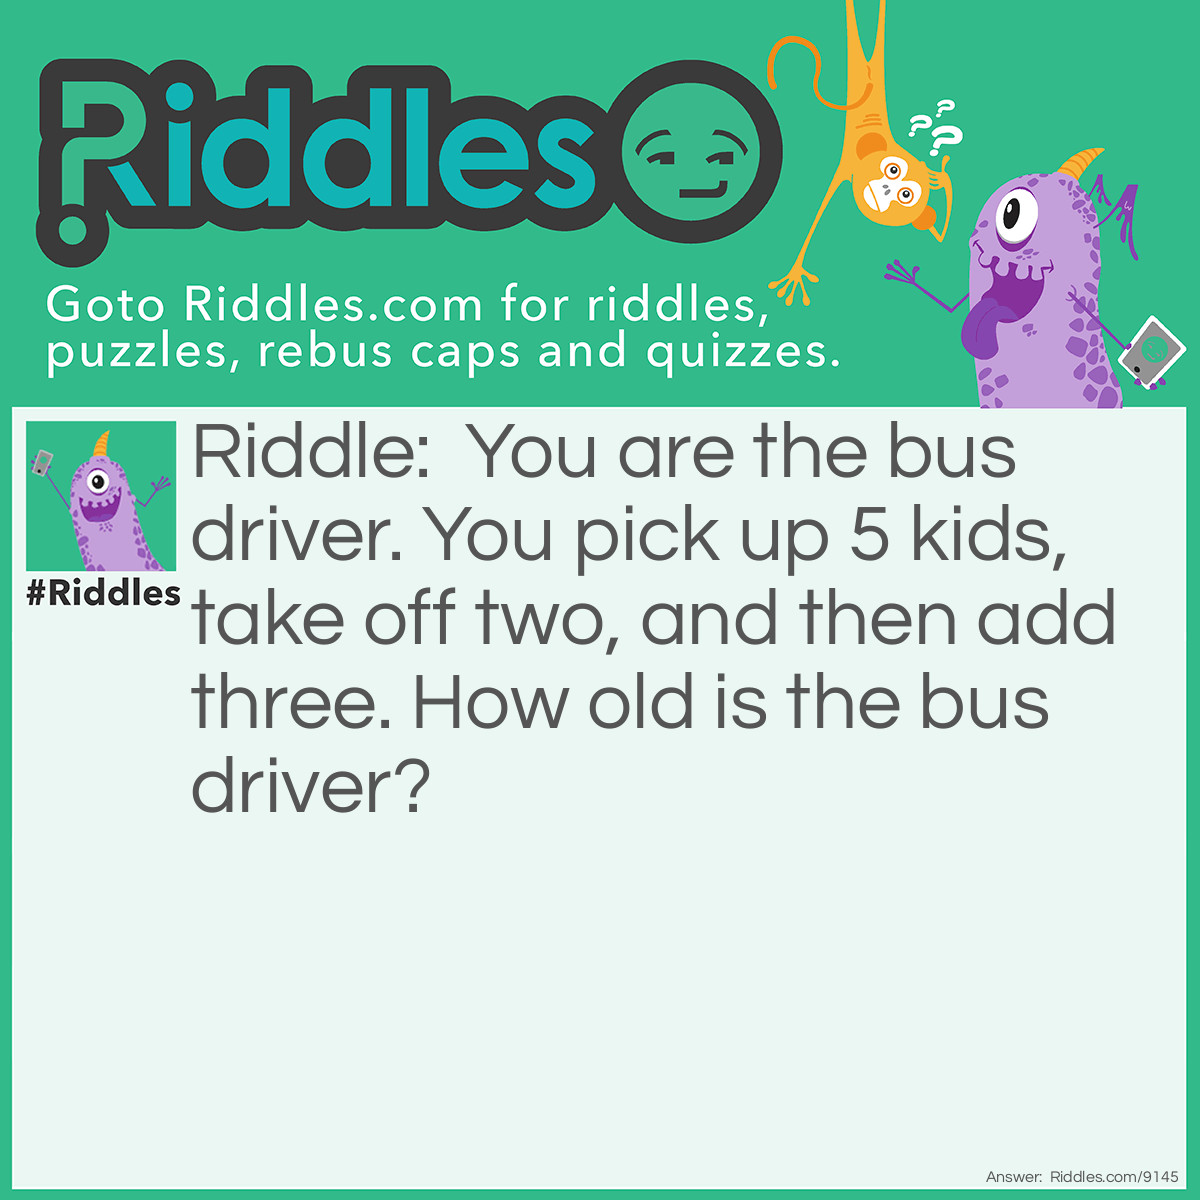 Riddle: You are the bus driver. You pick up 5 kids, take off two, and then add three. How old is the bus driver? Answer: Whatever age you are! (You are the bus driver)